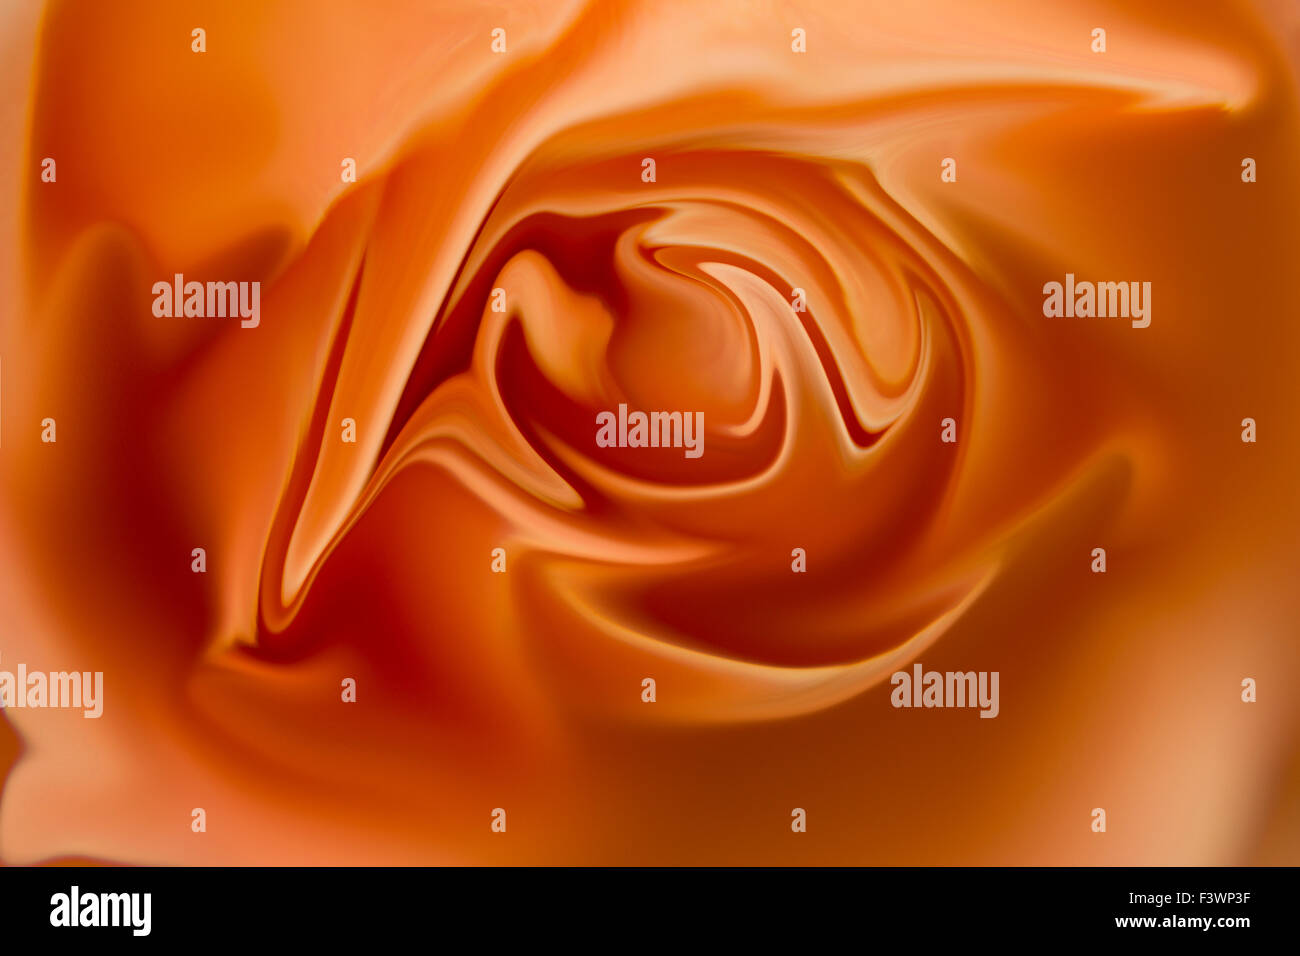 abstract and manipulated peach colored rose Stock Photo